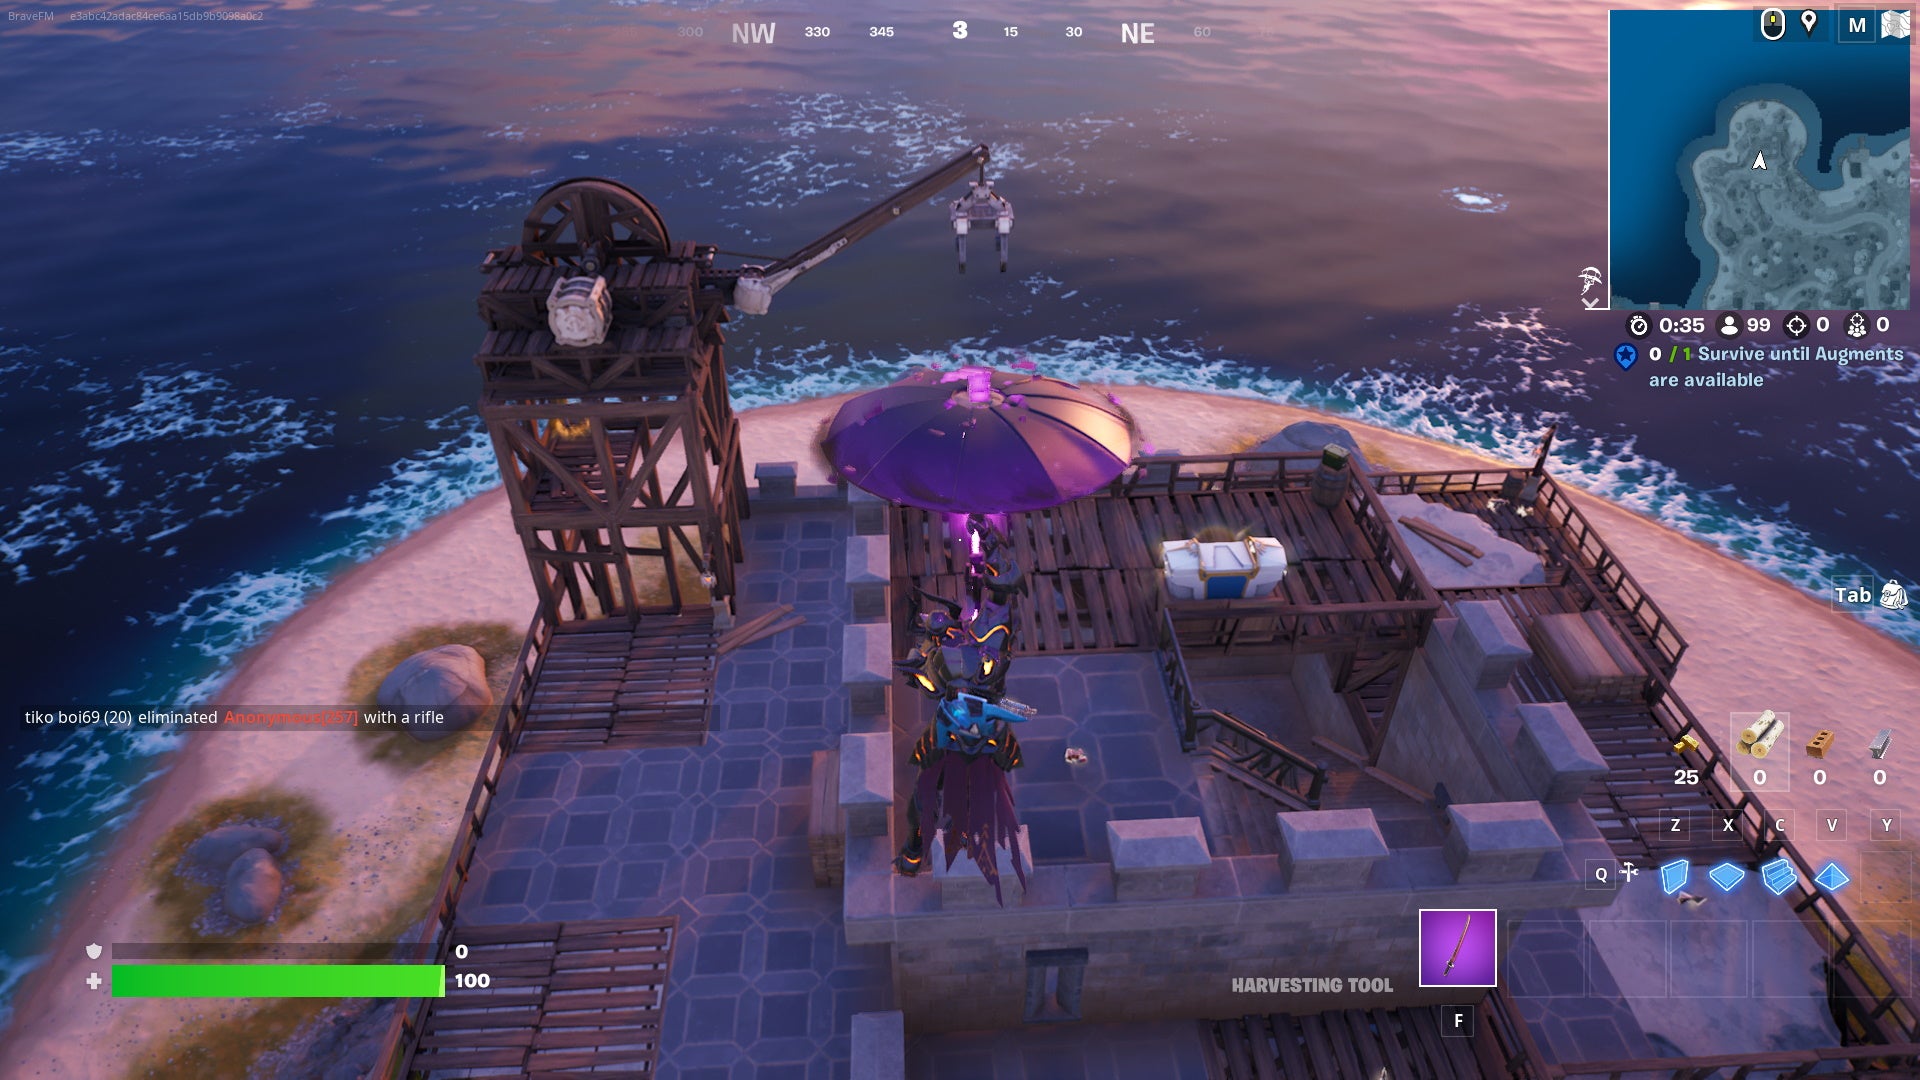 Fortnite Oathbound Chests: An animated character in pointy black armor glides down on a purple umbrella, heading towards a wooden platform atop stone ramparts. A large silver chest is sitting on the platform.